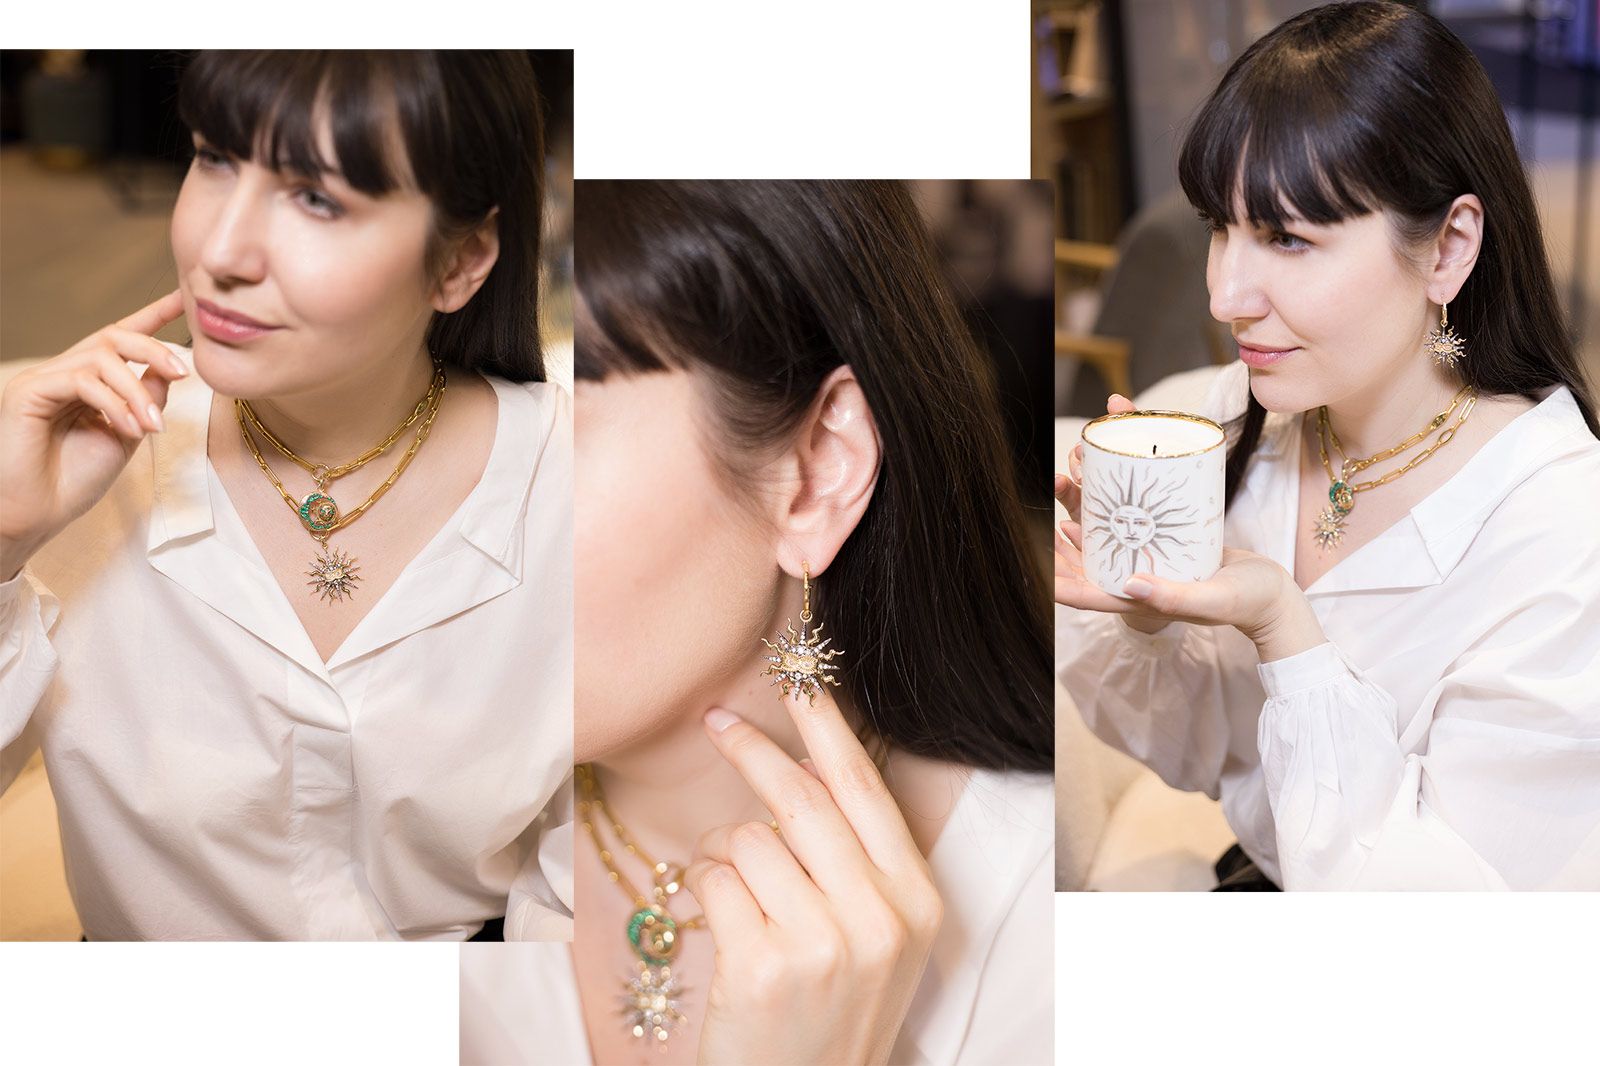 Katerina Perez wearing a selection of Wings of Wisdom jewellery pieces from the Shifted Paradigm collection